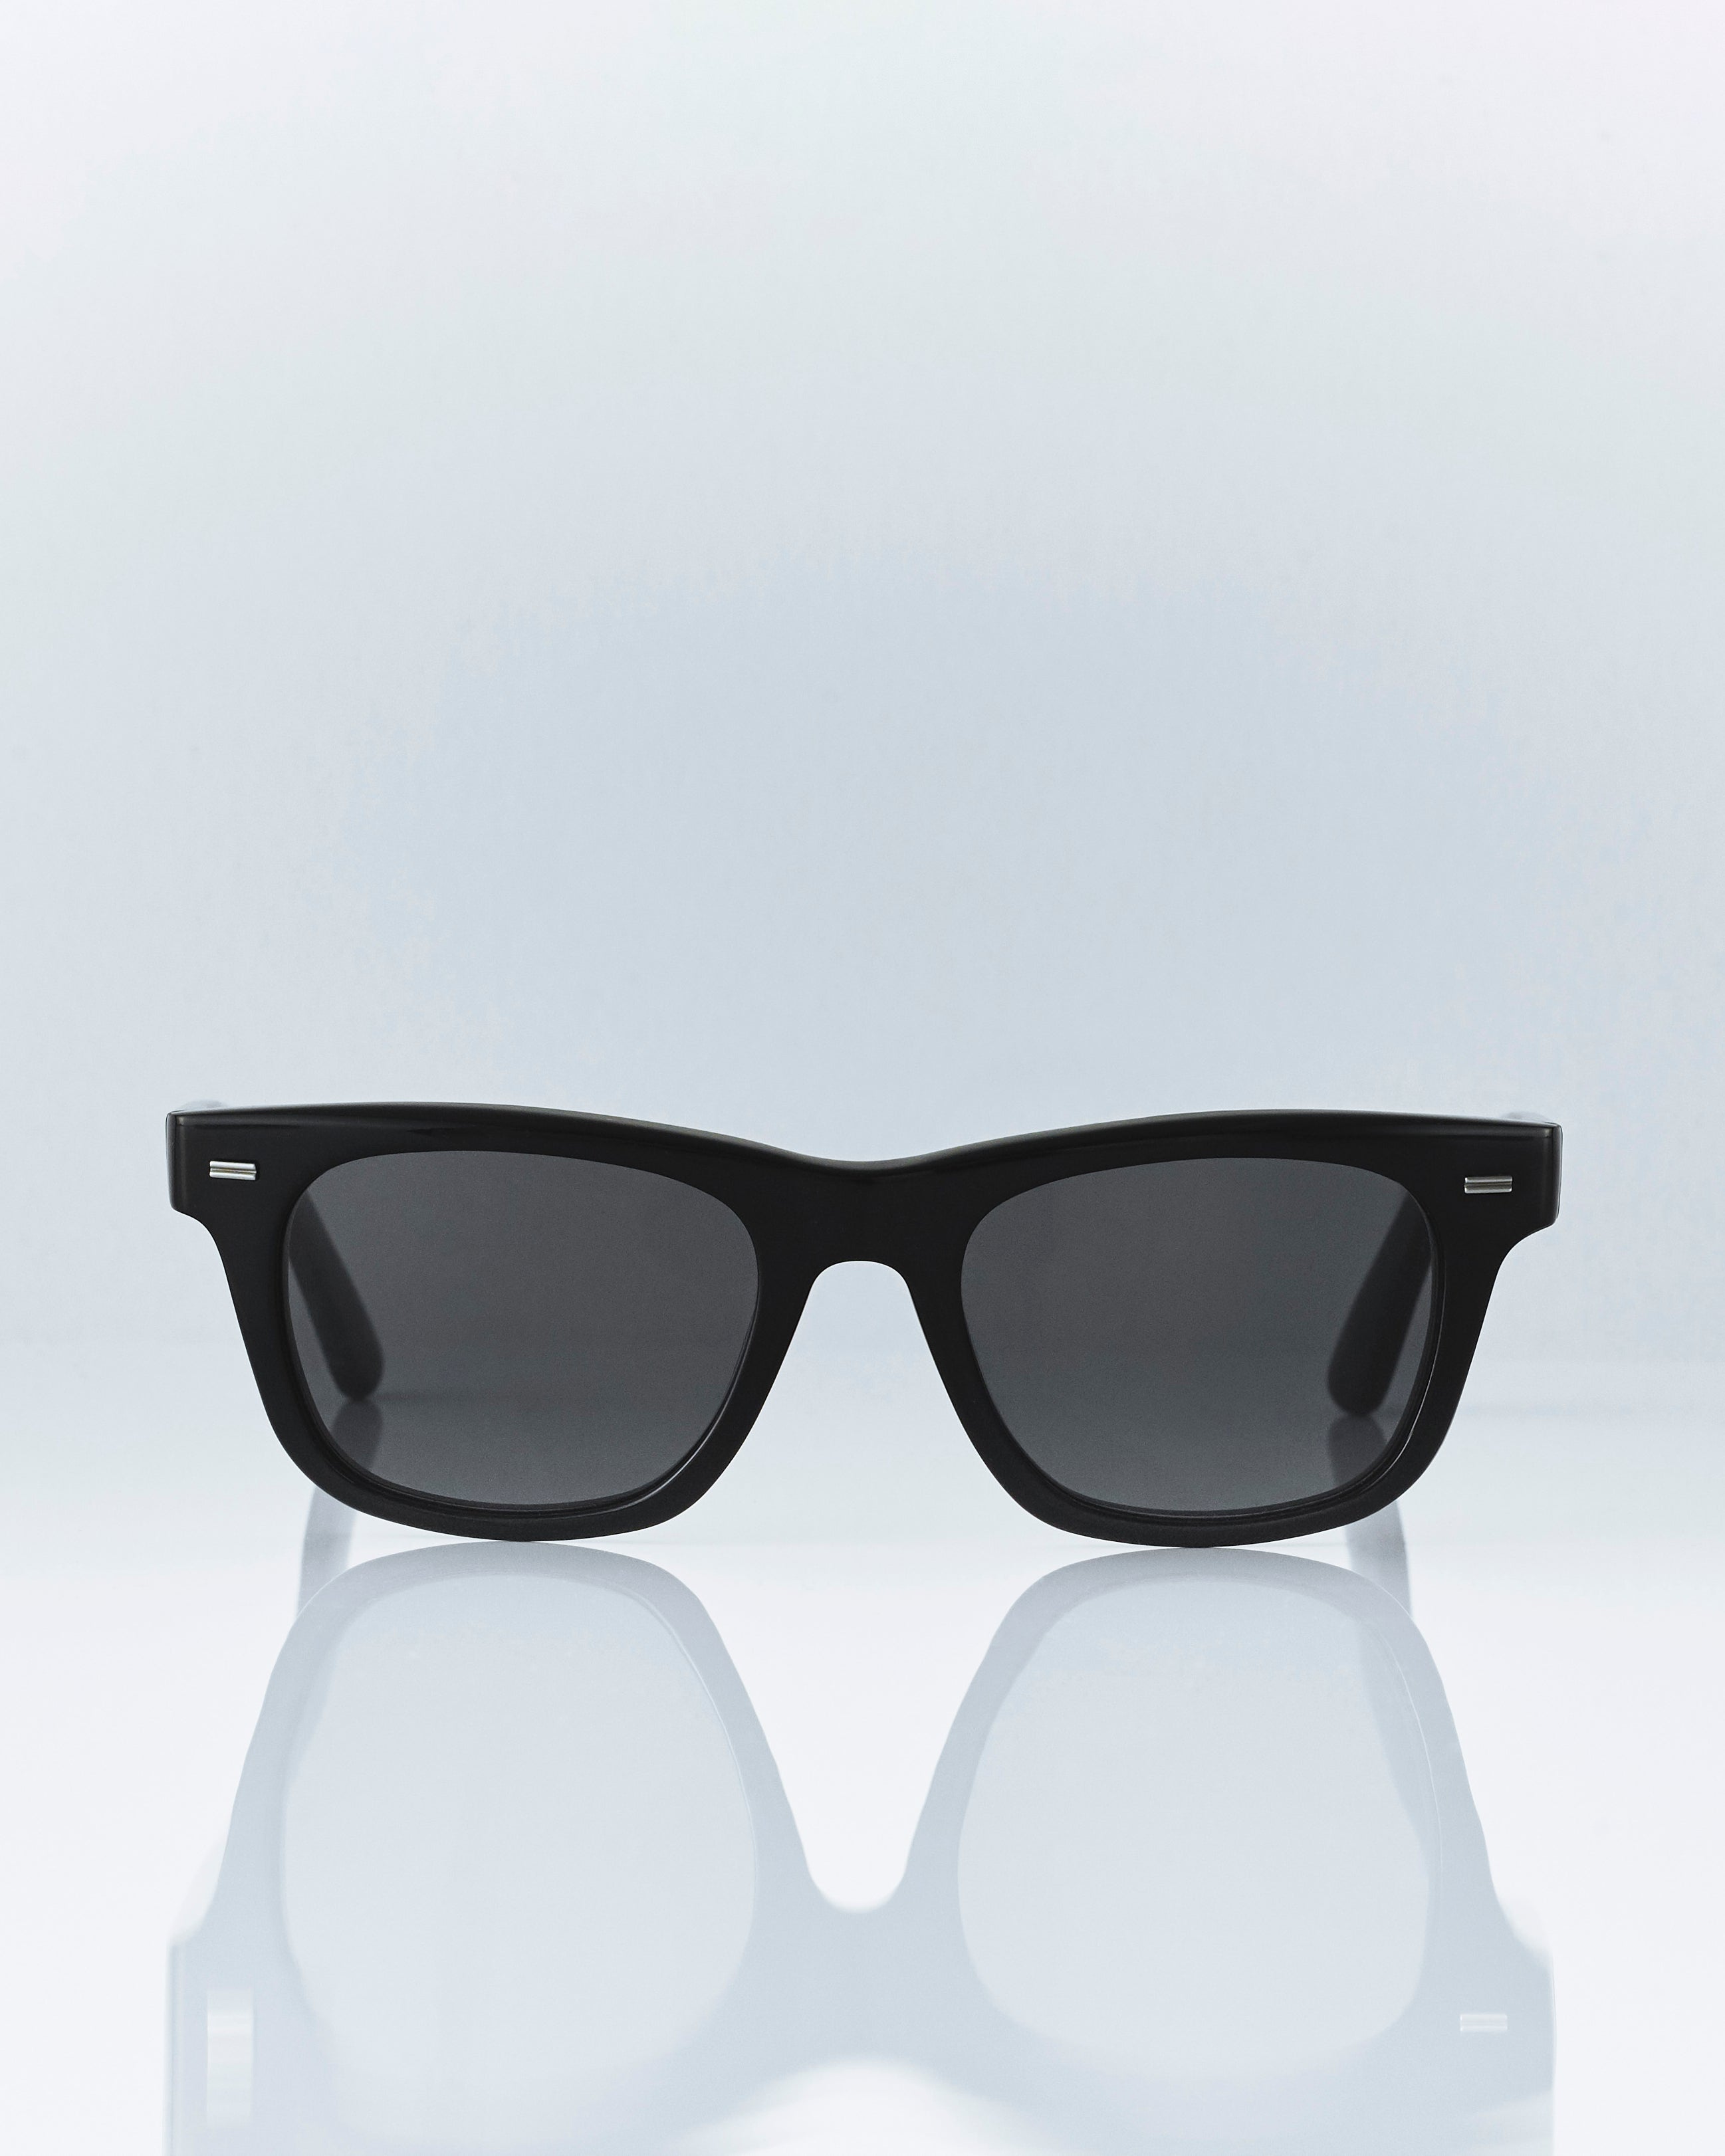 sunglasses, front view